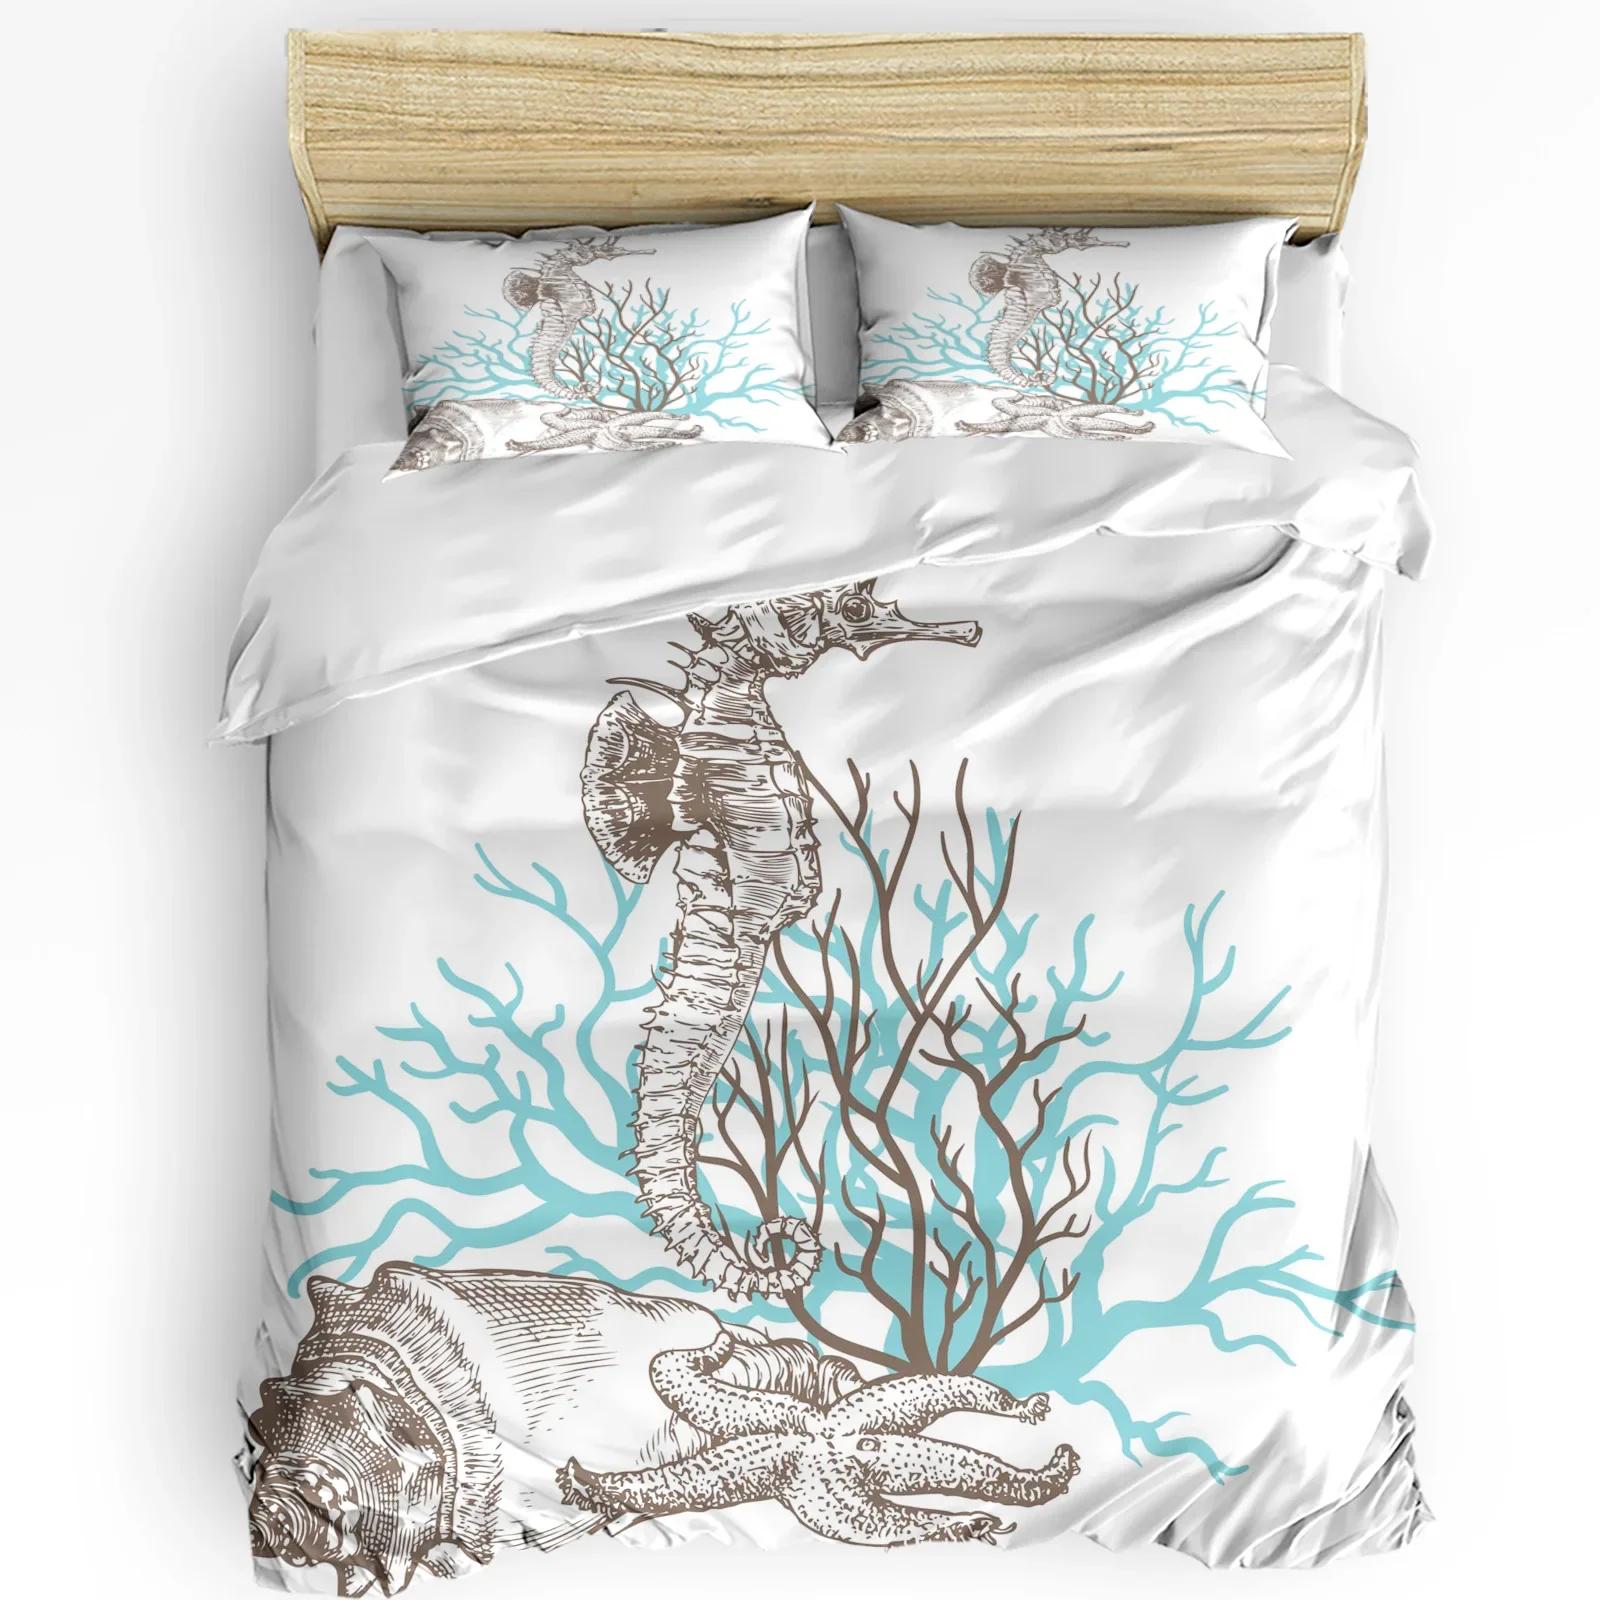 Seahorse Coral Shell Printed Comfort Duvet Cover Pillow Case Home Textile Quilt Cover Boy Kid Teen Girl Luxury 3pcs